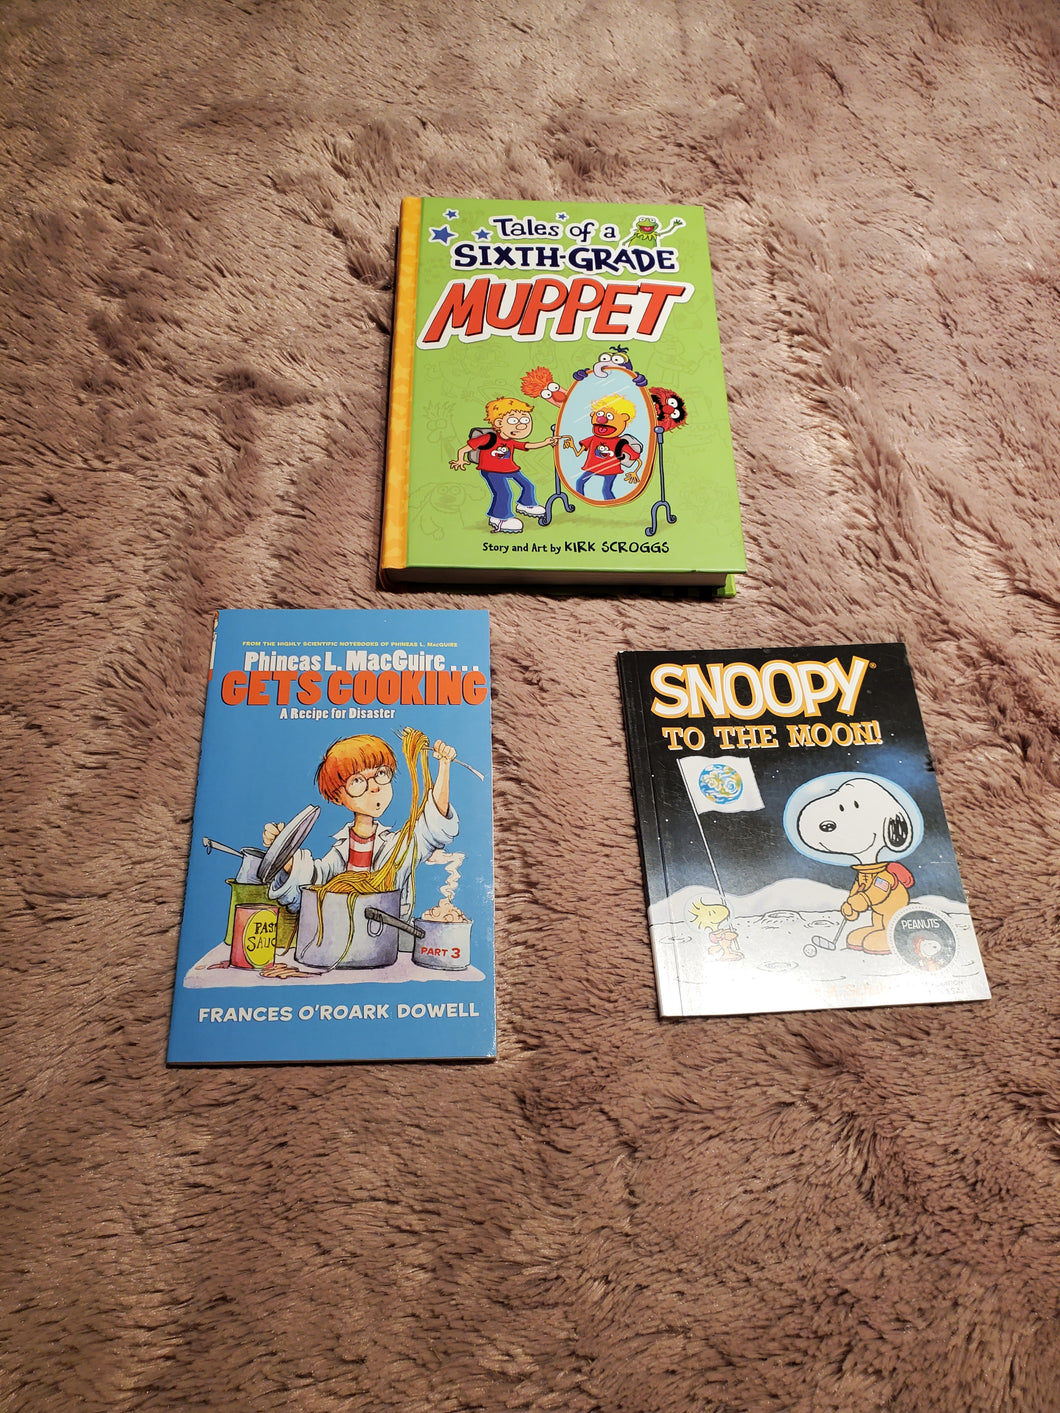 Lot of 3 books Muppet hardcover, Phineas McGuire Gets Cooking paperbacks, and bonus Snoopy to the Moon